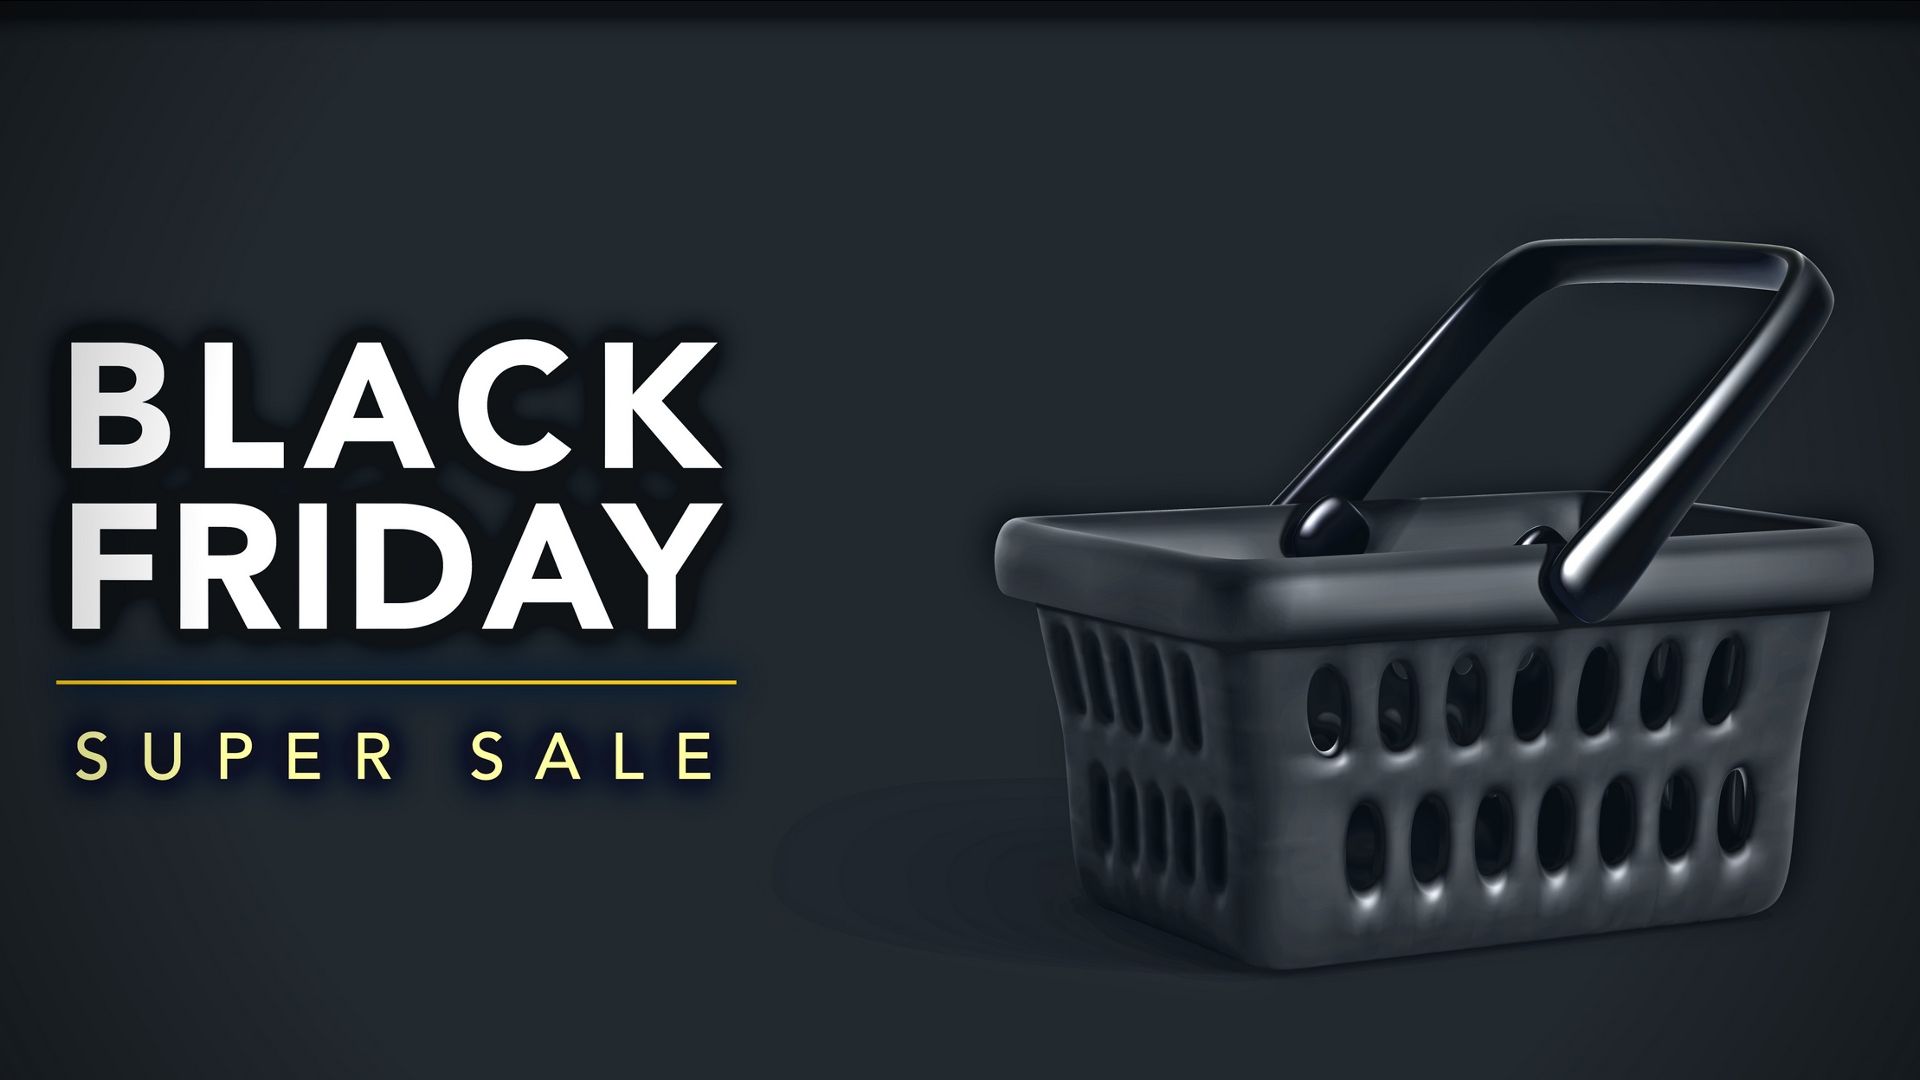 Black Friday & Cyber Monday Deals for Parental Control Apps